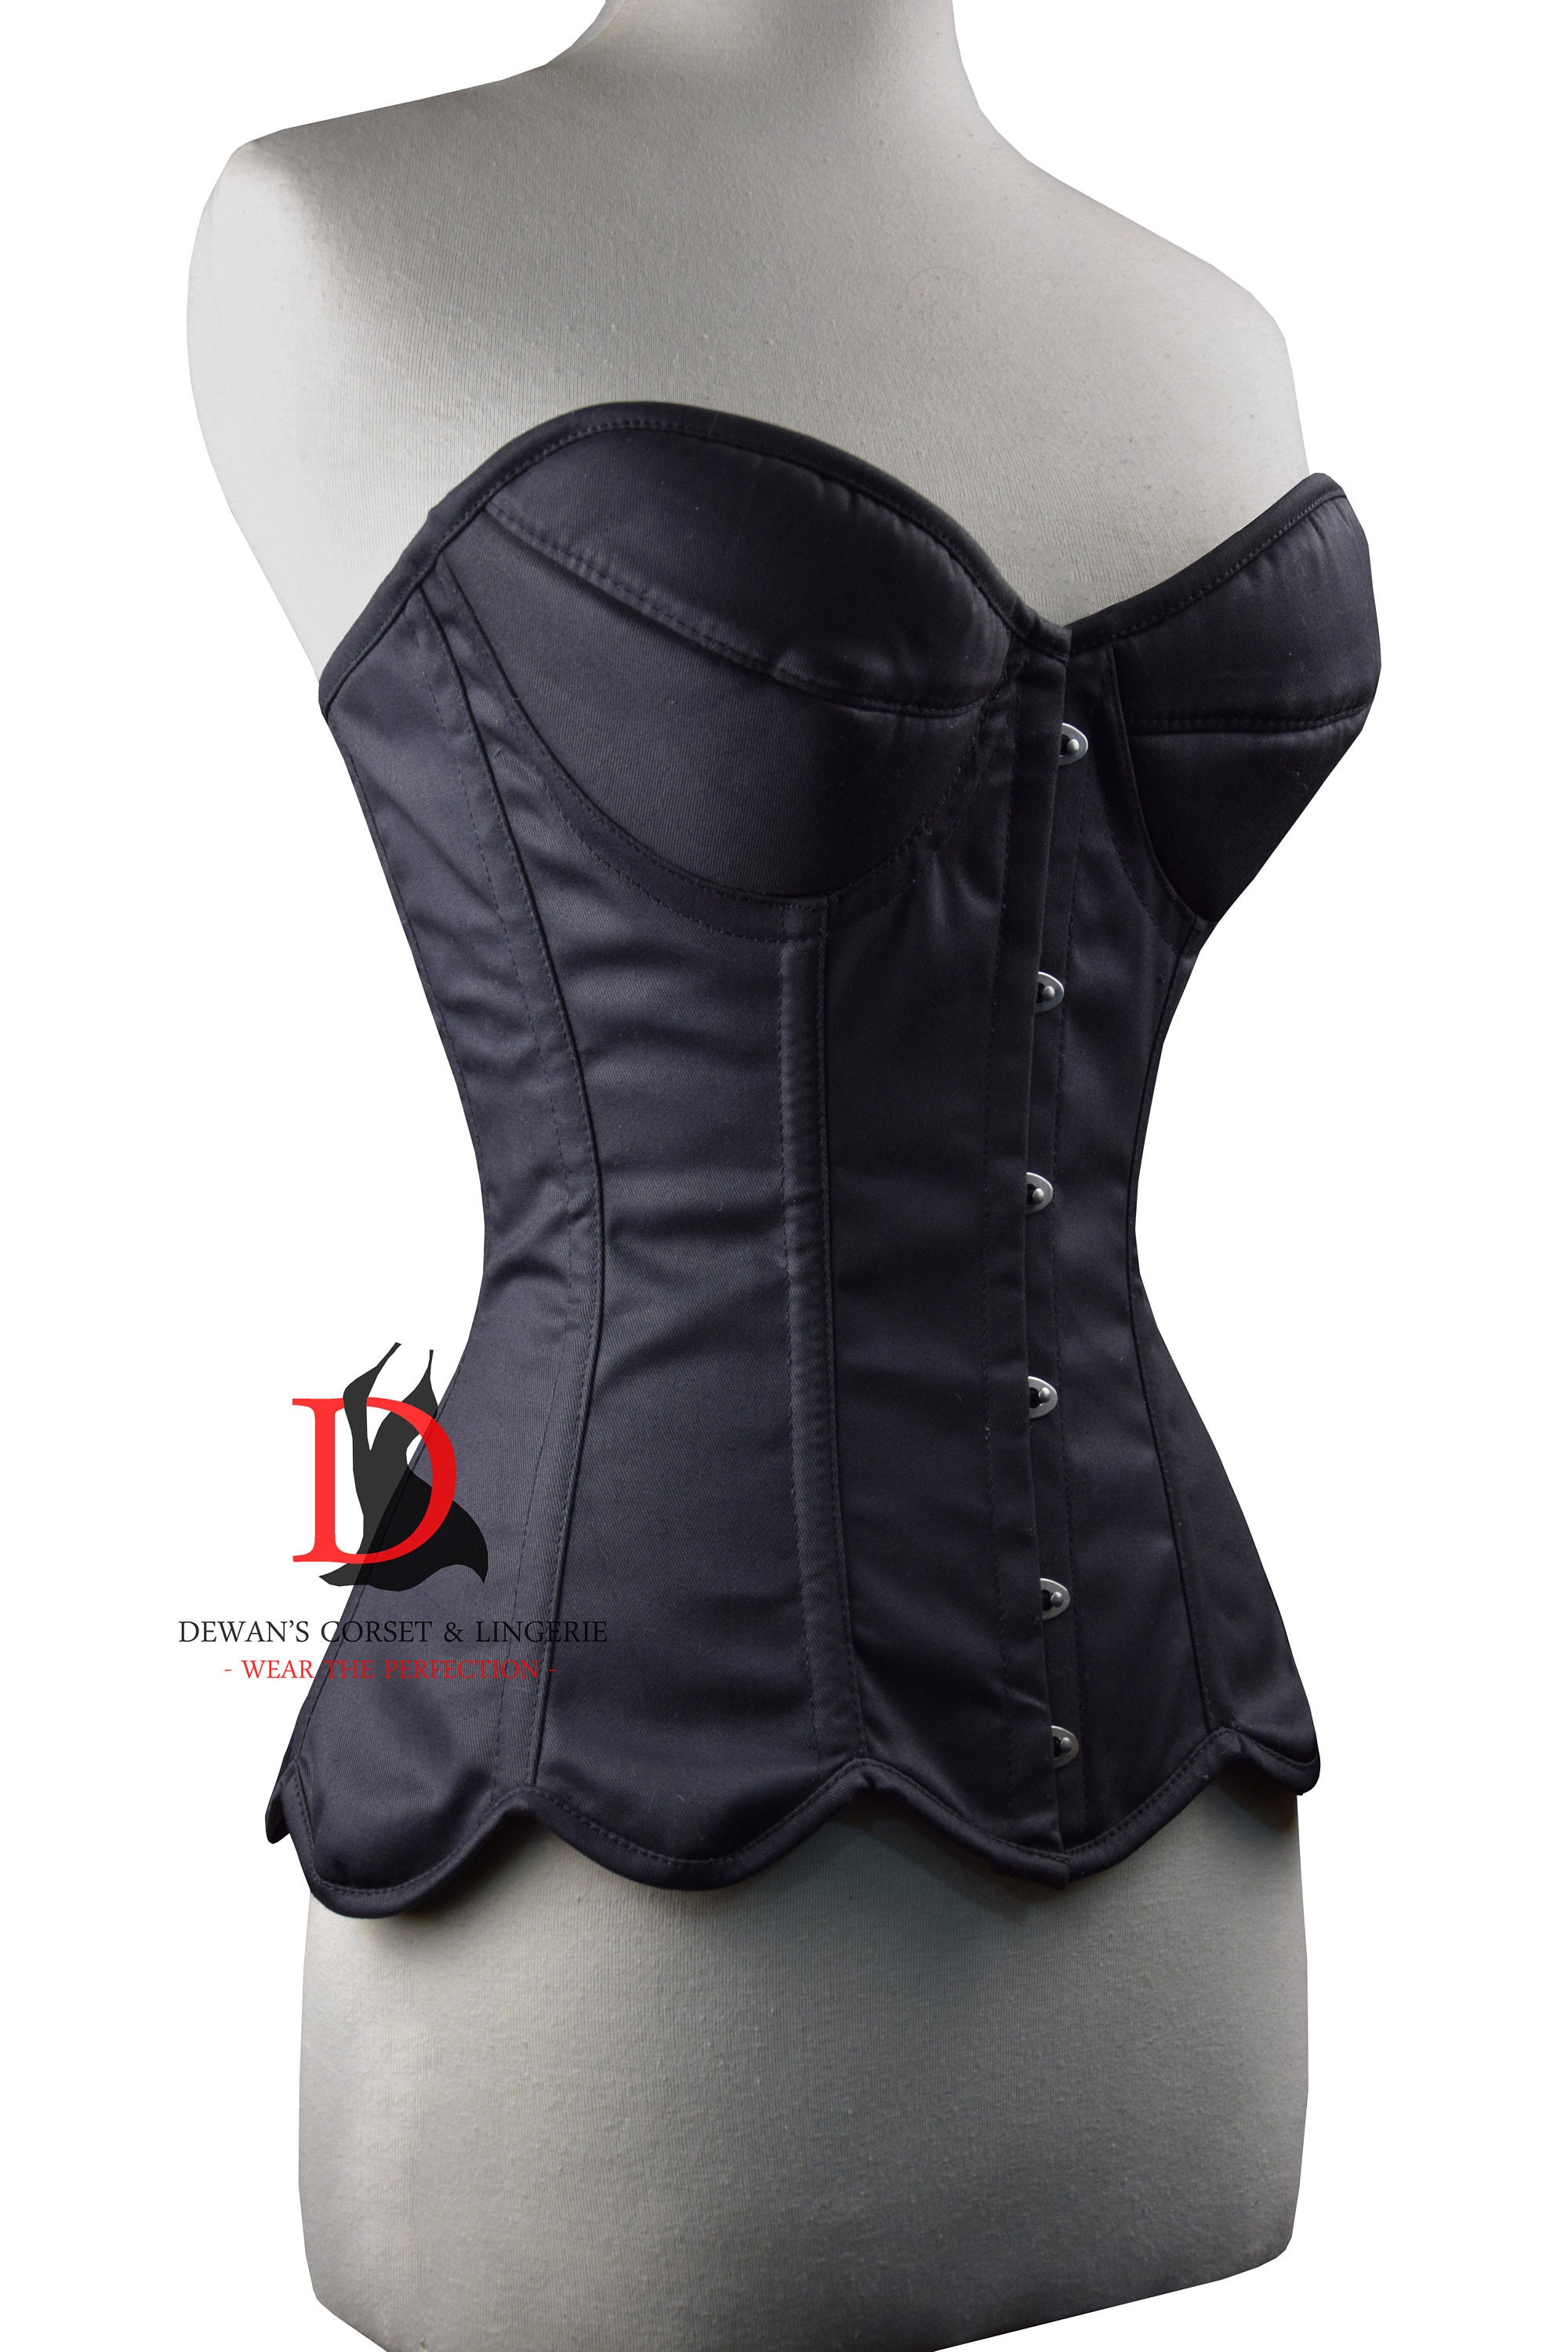 Black satin corset with cups